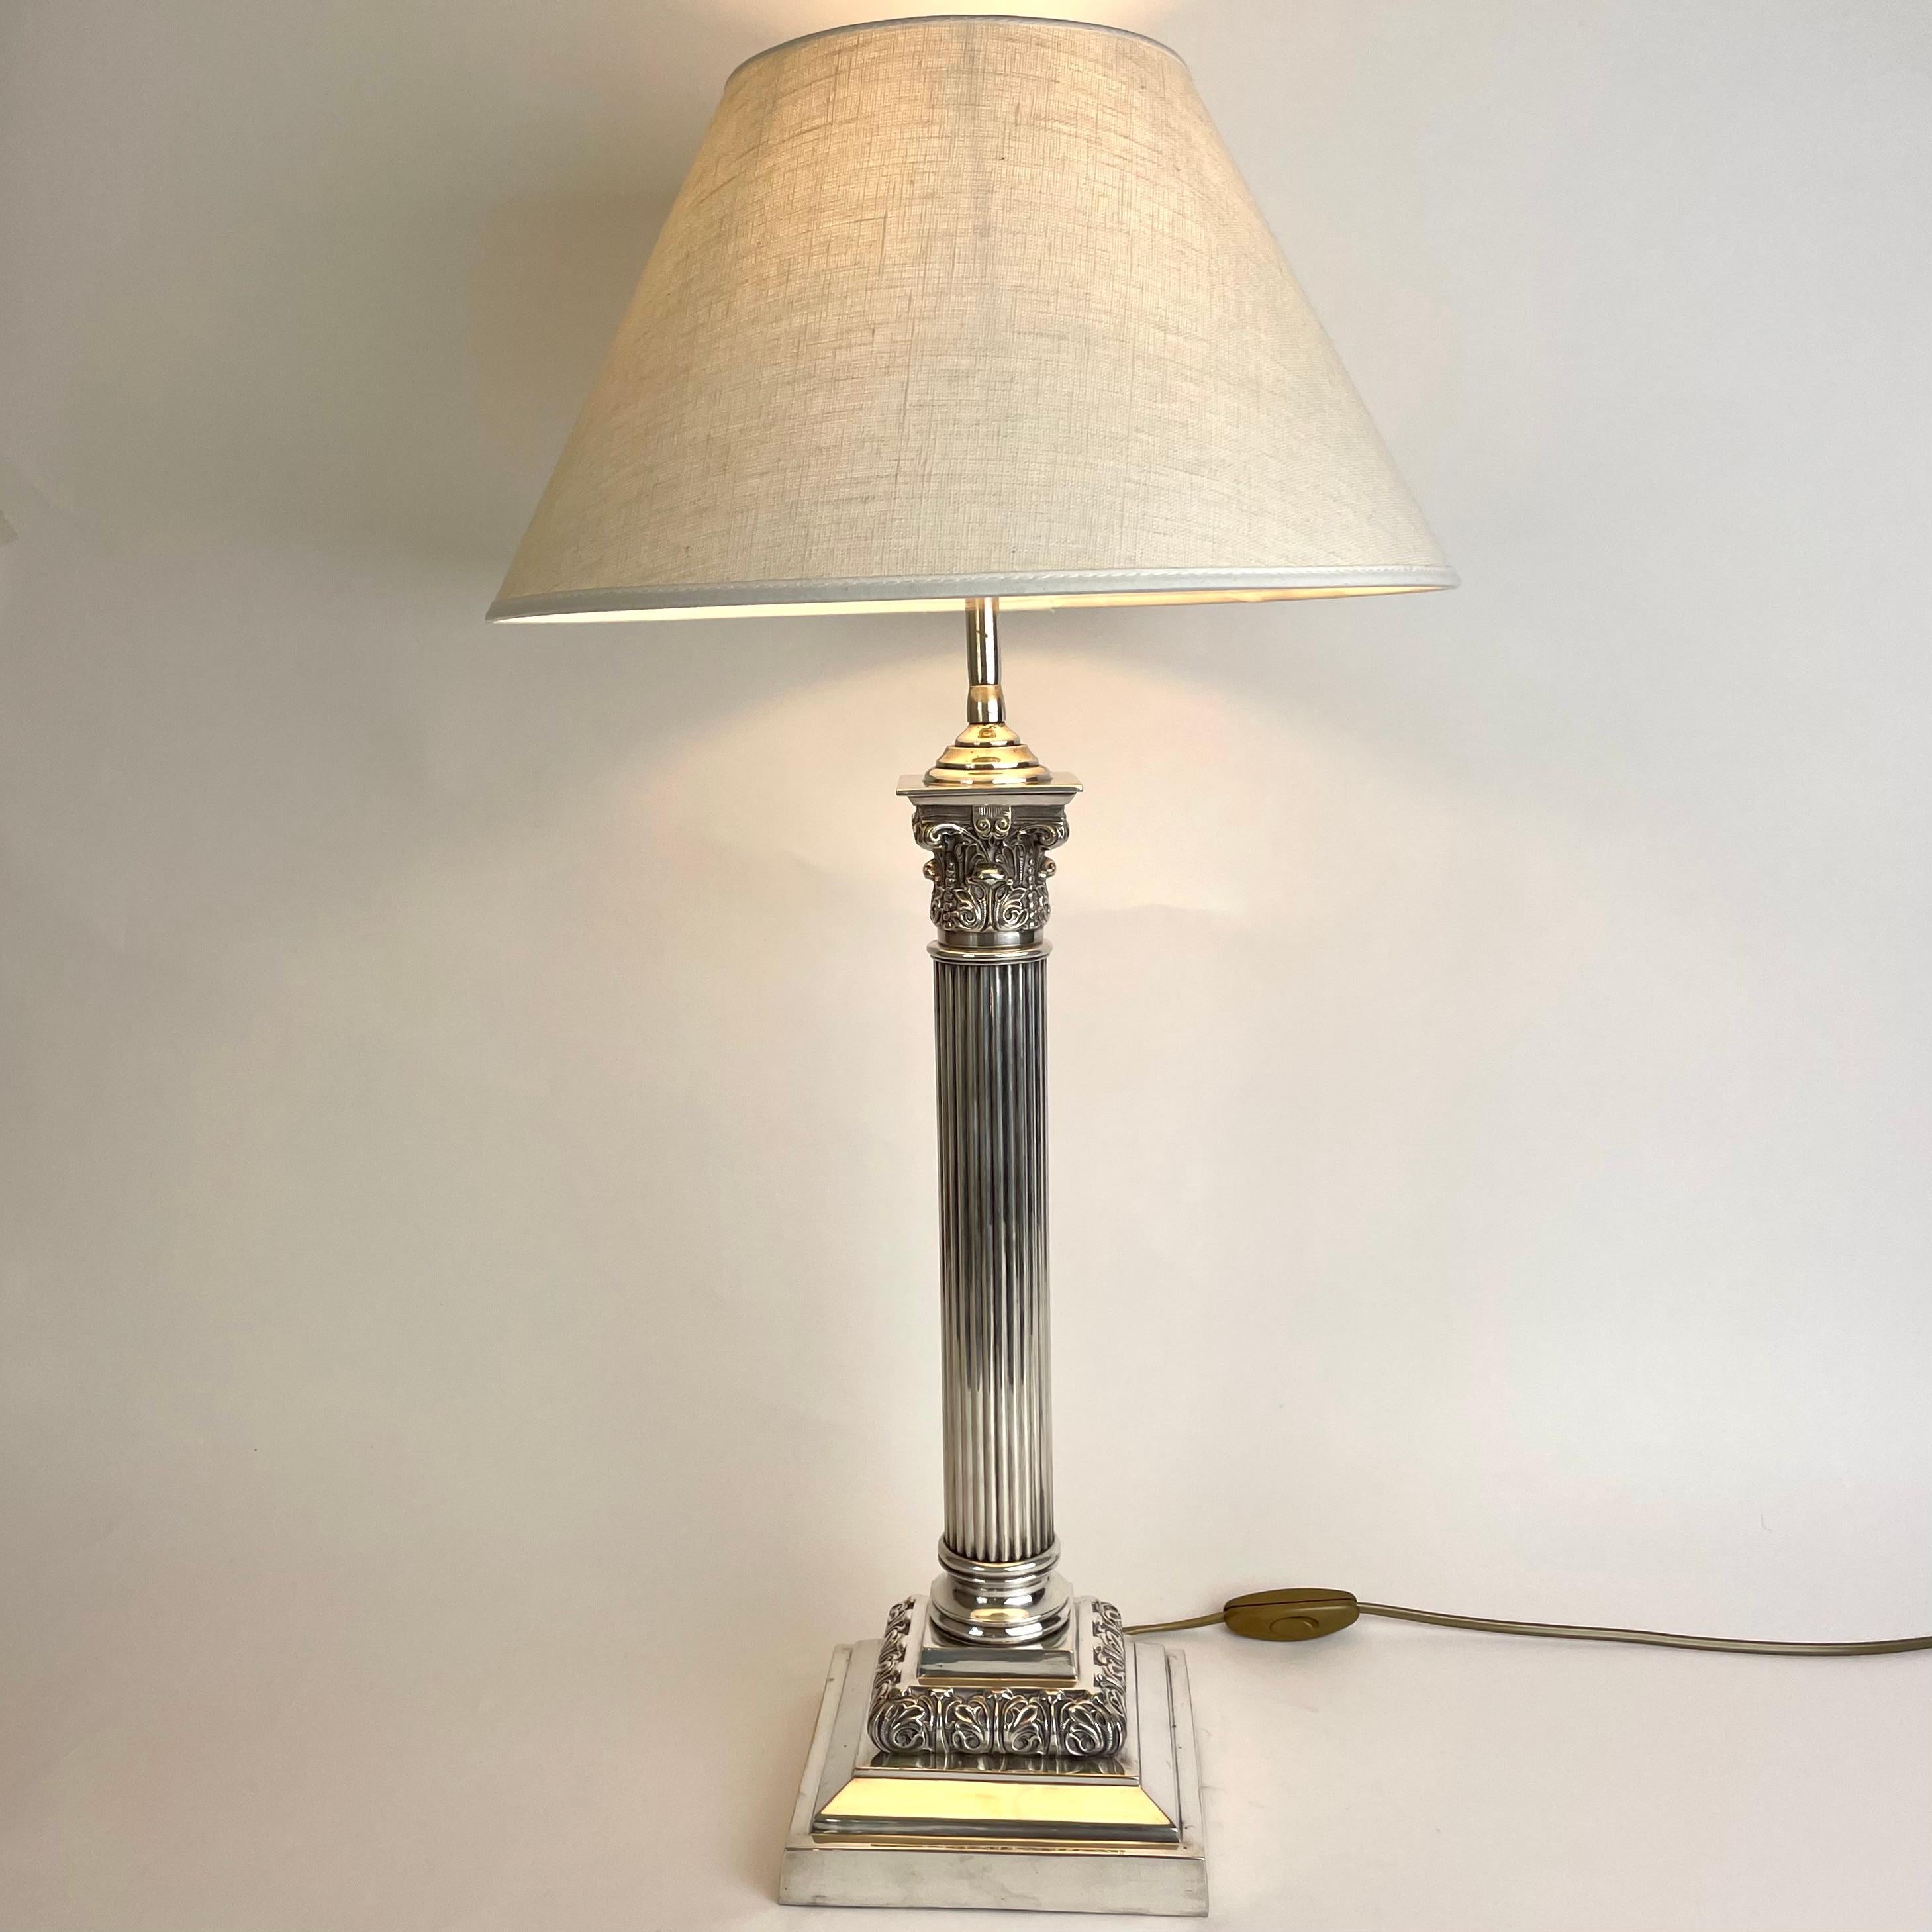 Sophisticated silver-plated Table Lamp with Classic column made during the late 19th Century. Originally a kerosene lamp converted to table lamp in the early 20th Century.

Newly rewired electricity 

The linen lampshade

Wear consistent with age